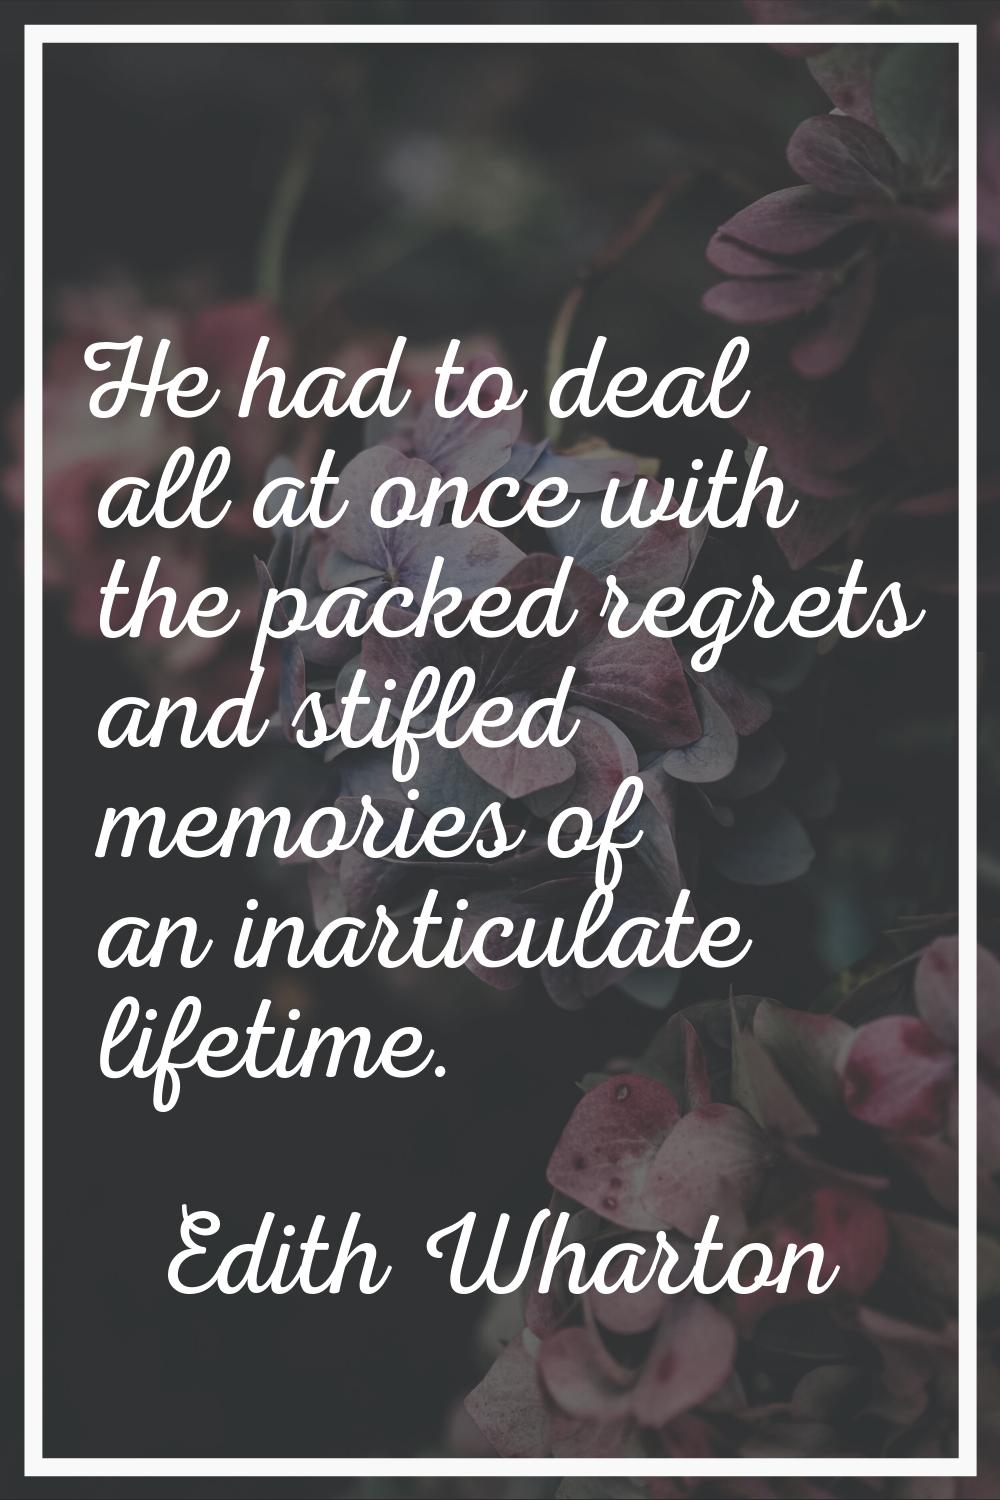 He had to deal all at once with the packed regrets and stifled memories of an inarticulate lifetime